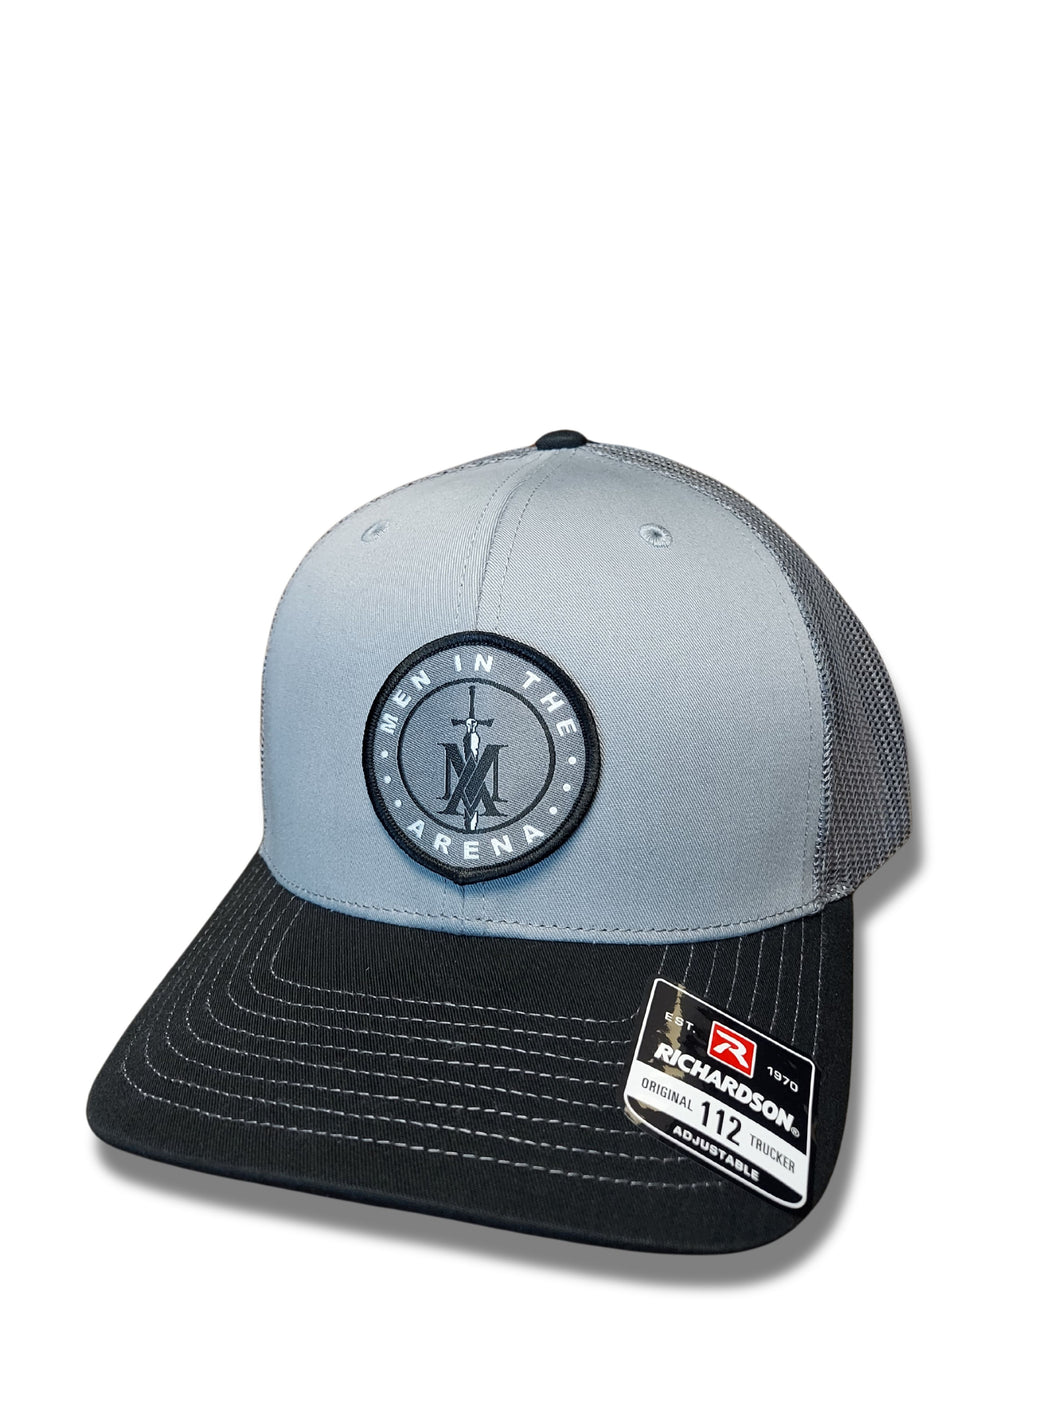 Trucker Hat (Light Grey and Black w/ Patch)